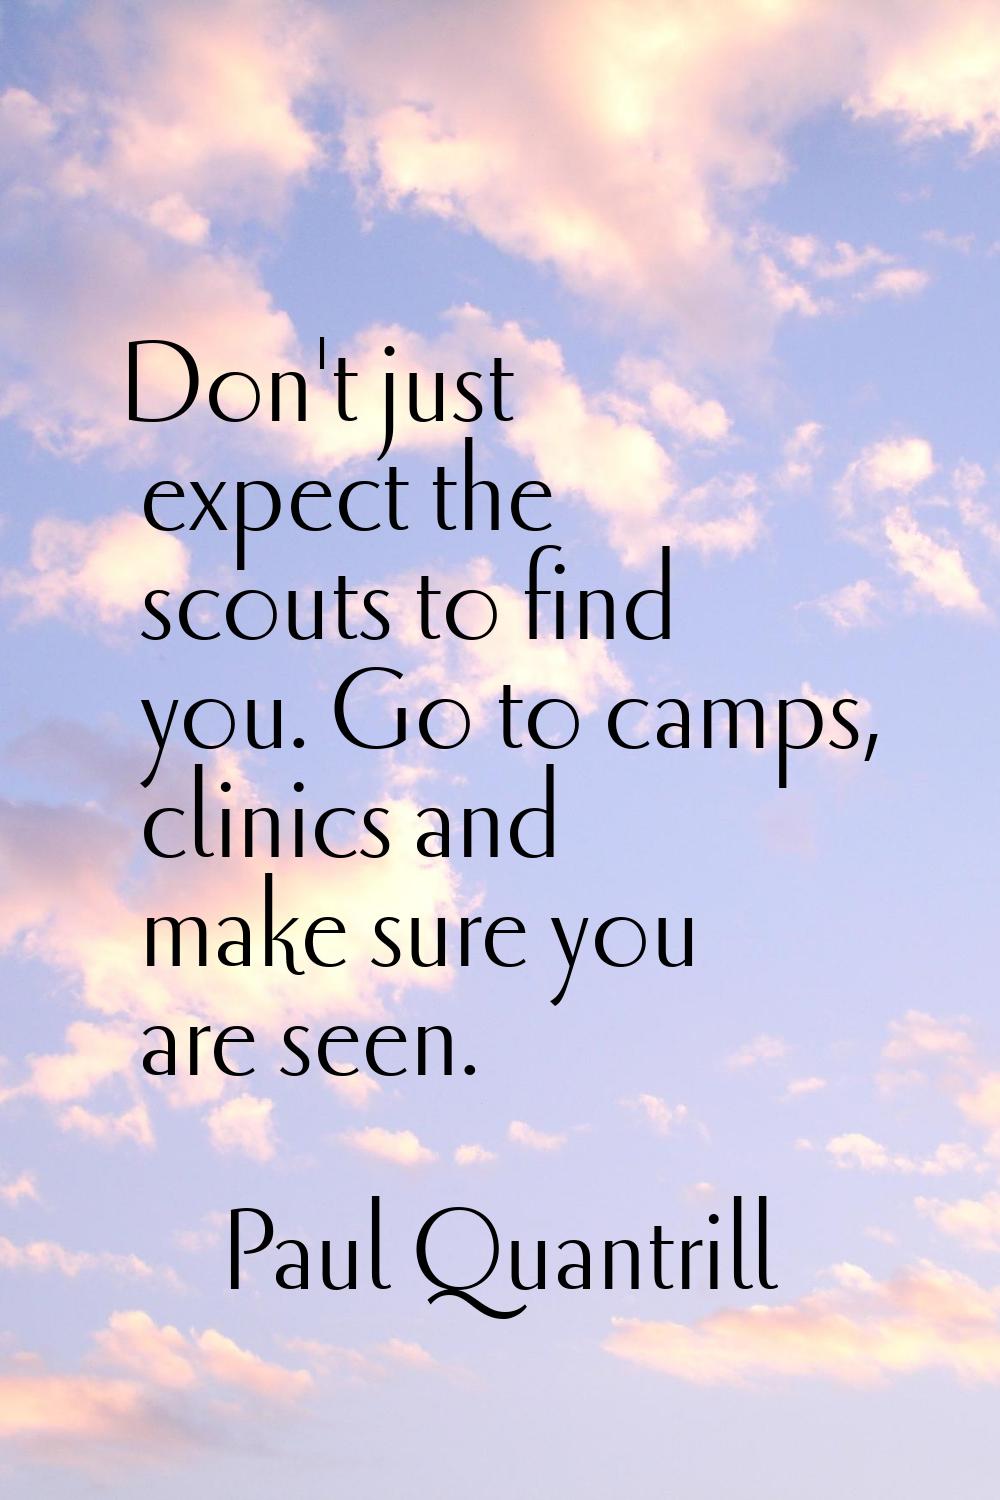 Don't just expect the scouts to find you. Go to camps, clinics and make sure you are seen.